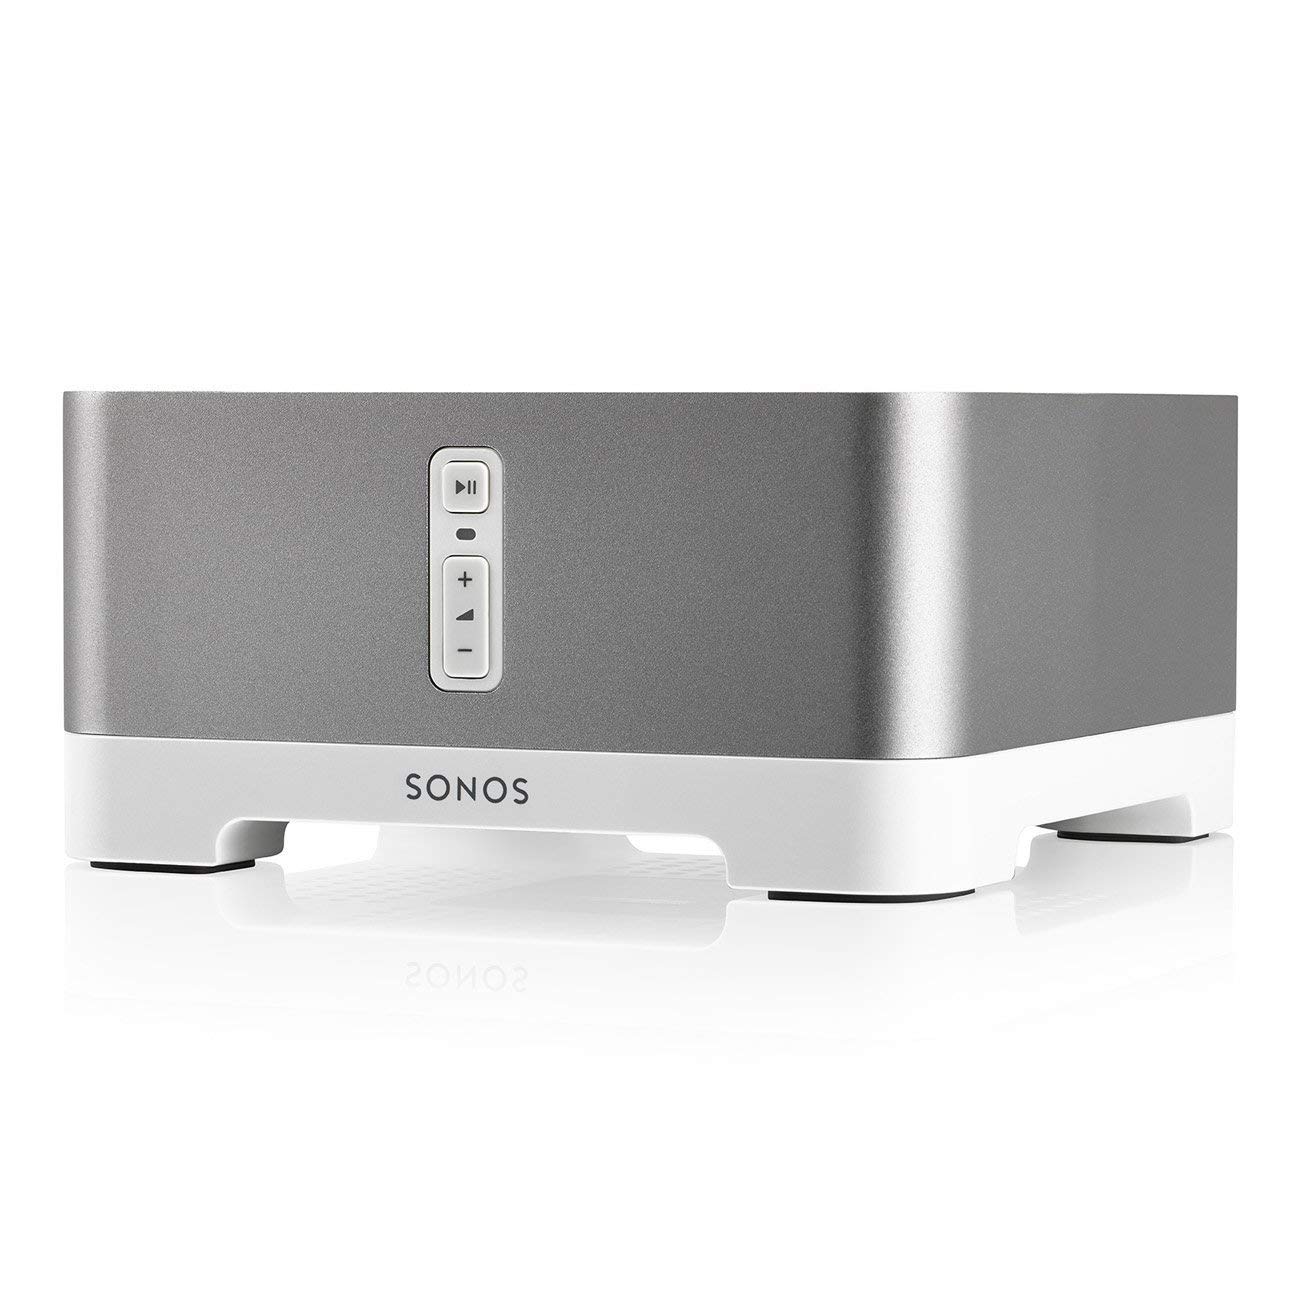 Sonos Devices Could Lose Access To Features After May 2020 | Digital